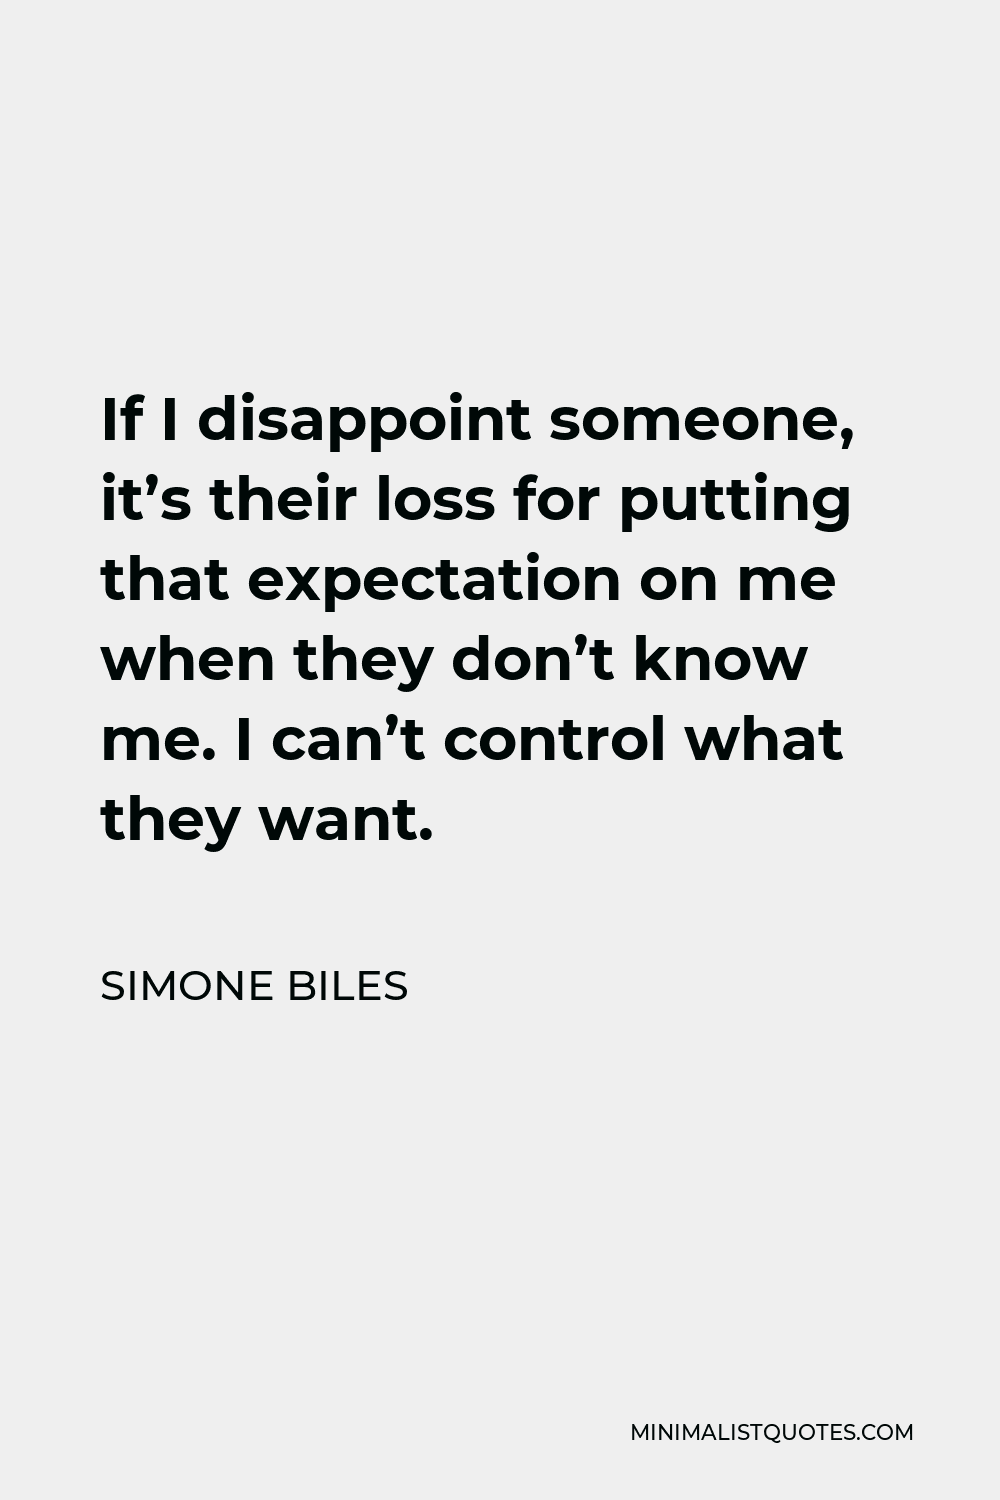 Simone Biles Quote - If I disappoint someone, it’s their loss for putting that expectation on me when they don’t know me. I can’t control what they want.